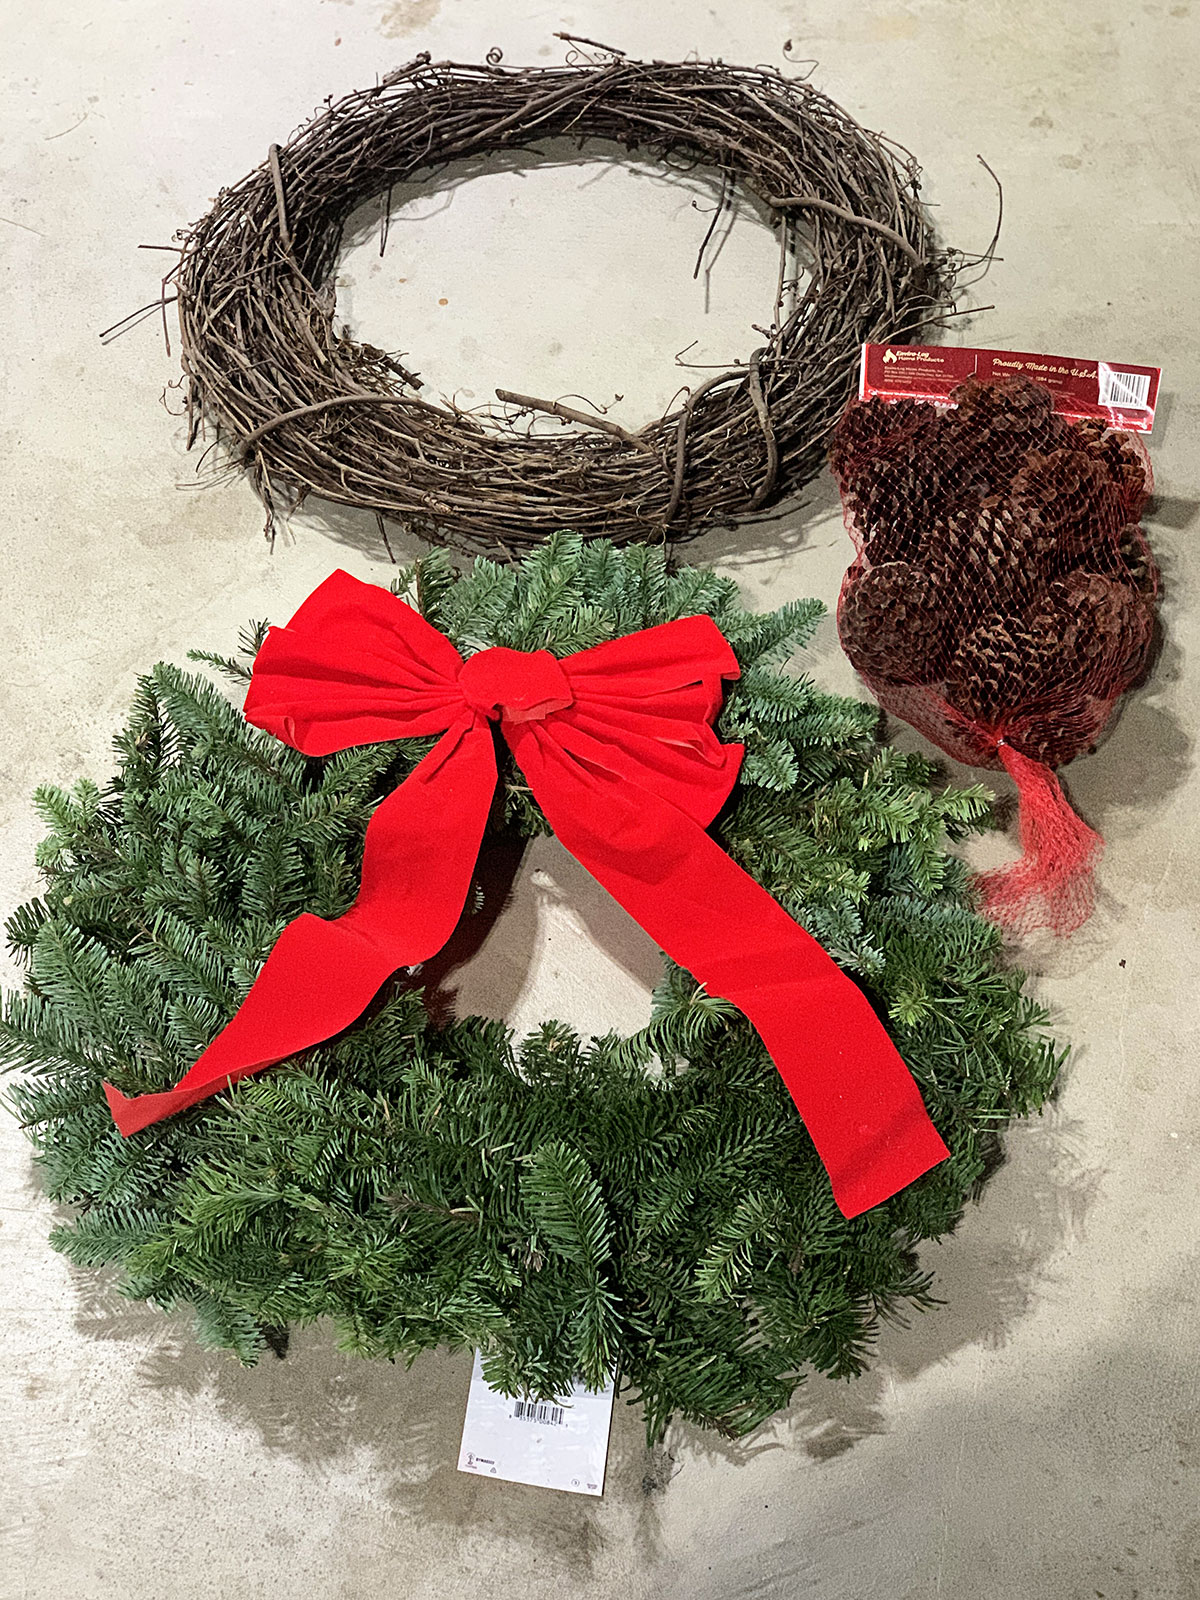 Supplies needed for a quick and easy porch urn for your holiday porch - grapevine wreath, fresh greens wreath and a bag of pine cones. All can be found at local hardware or grocery stores. 